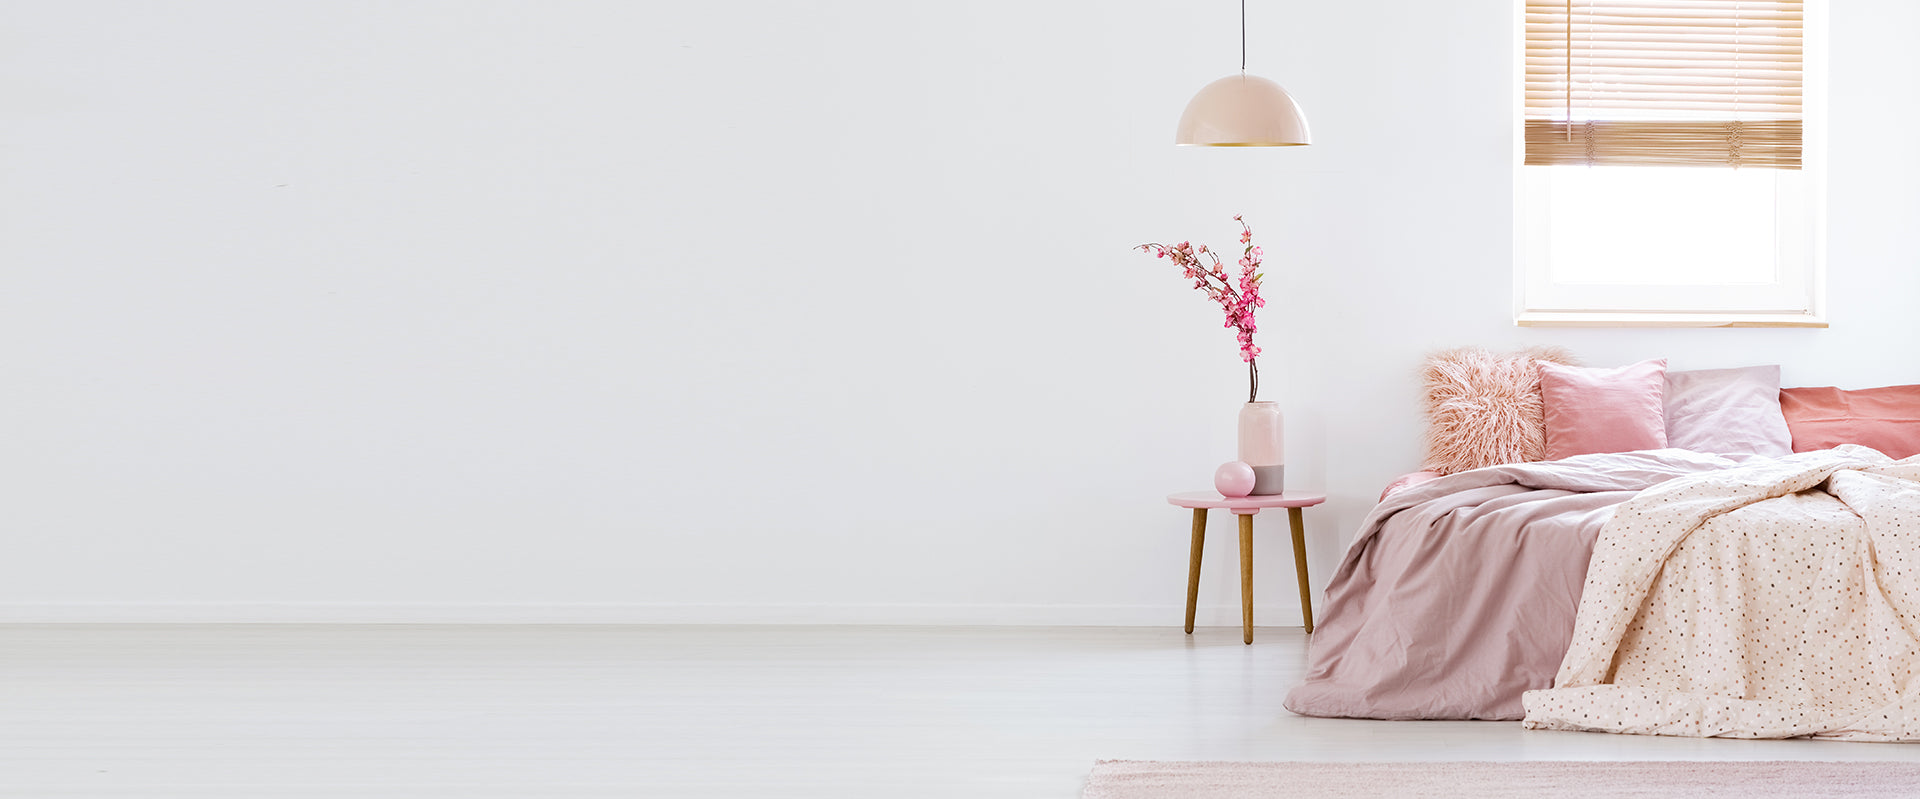 a pink blanket and a vase with flowers in a white room